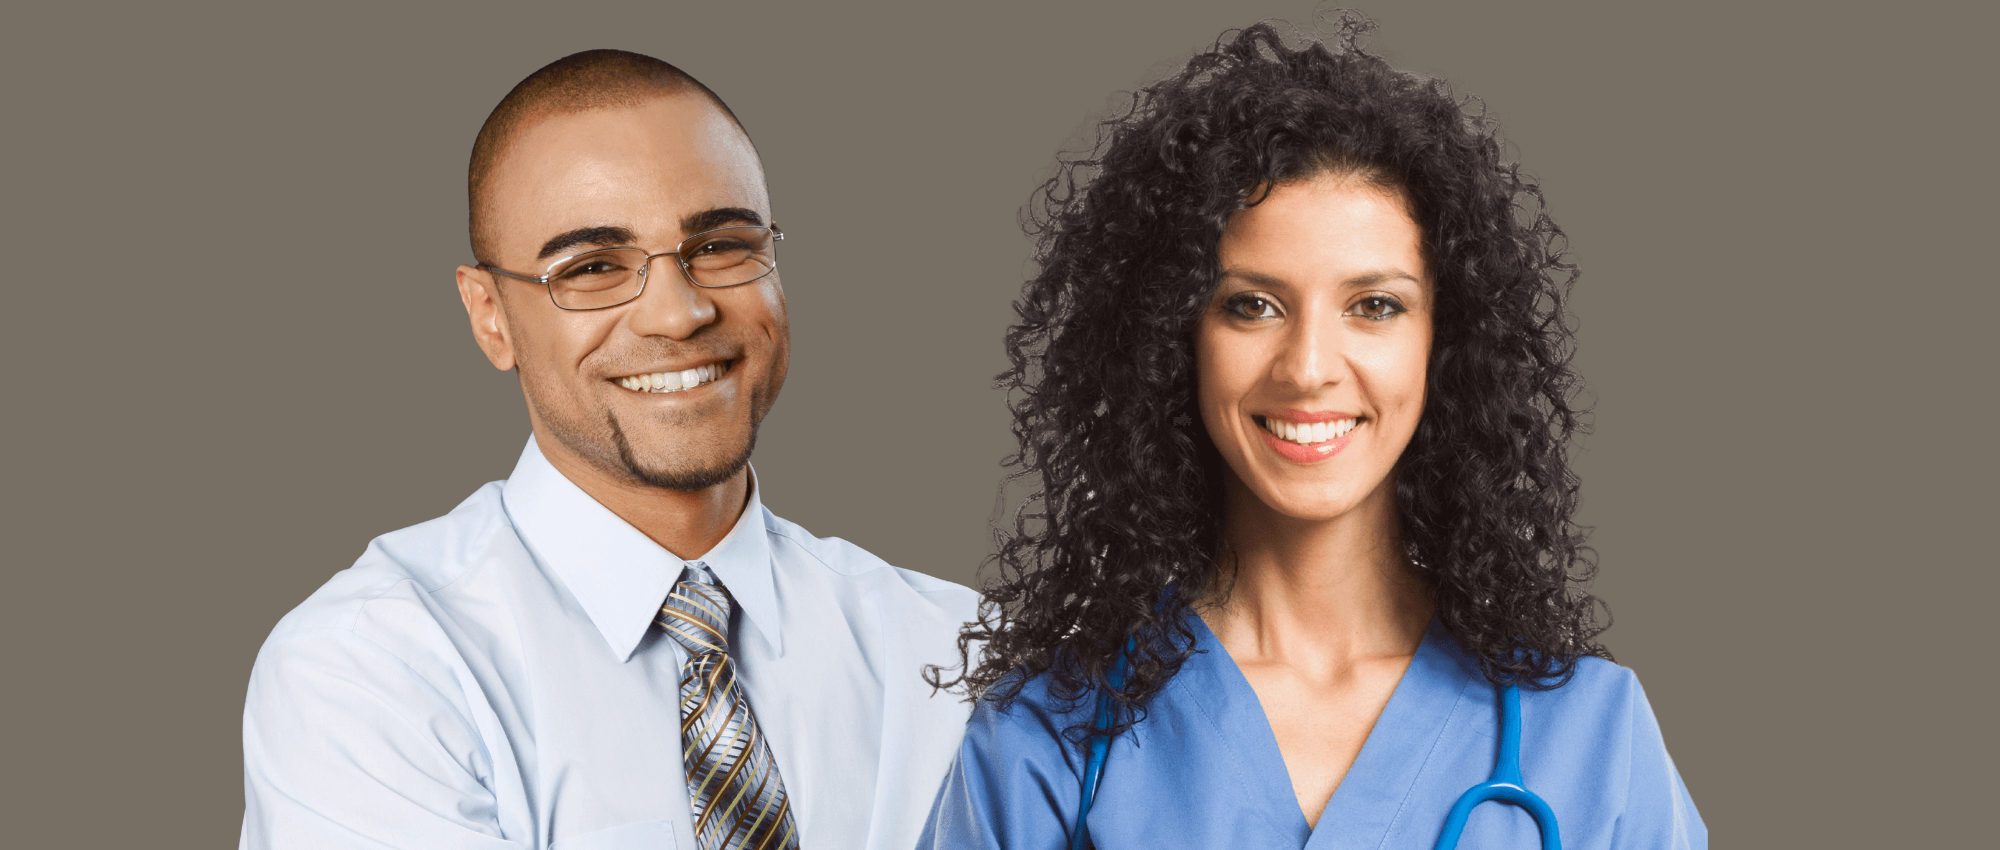 international accountant and nurse support